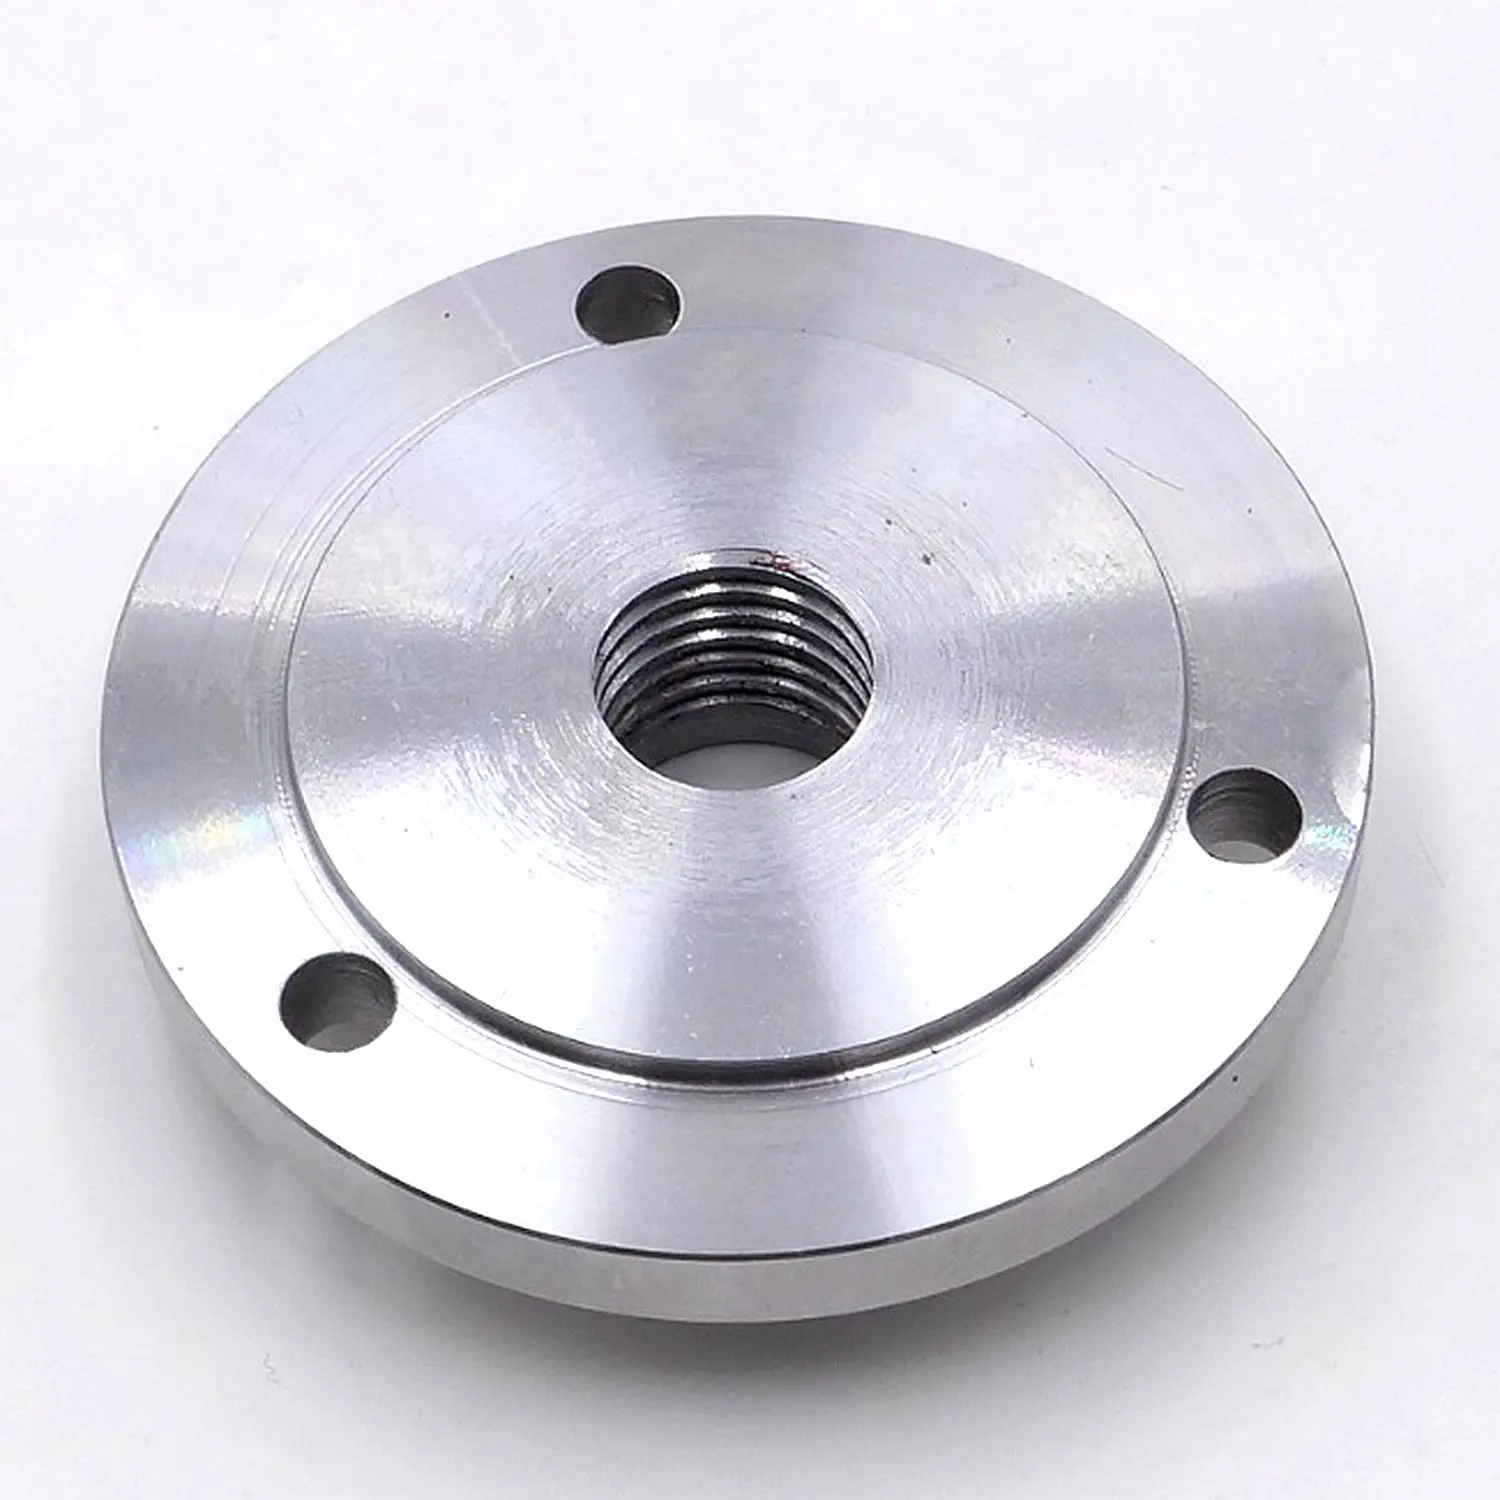 100 mm Back Plate Adaptor with Myford Thread Designed for Rotary Table + T  nuts